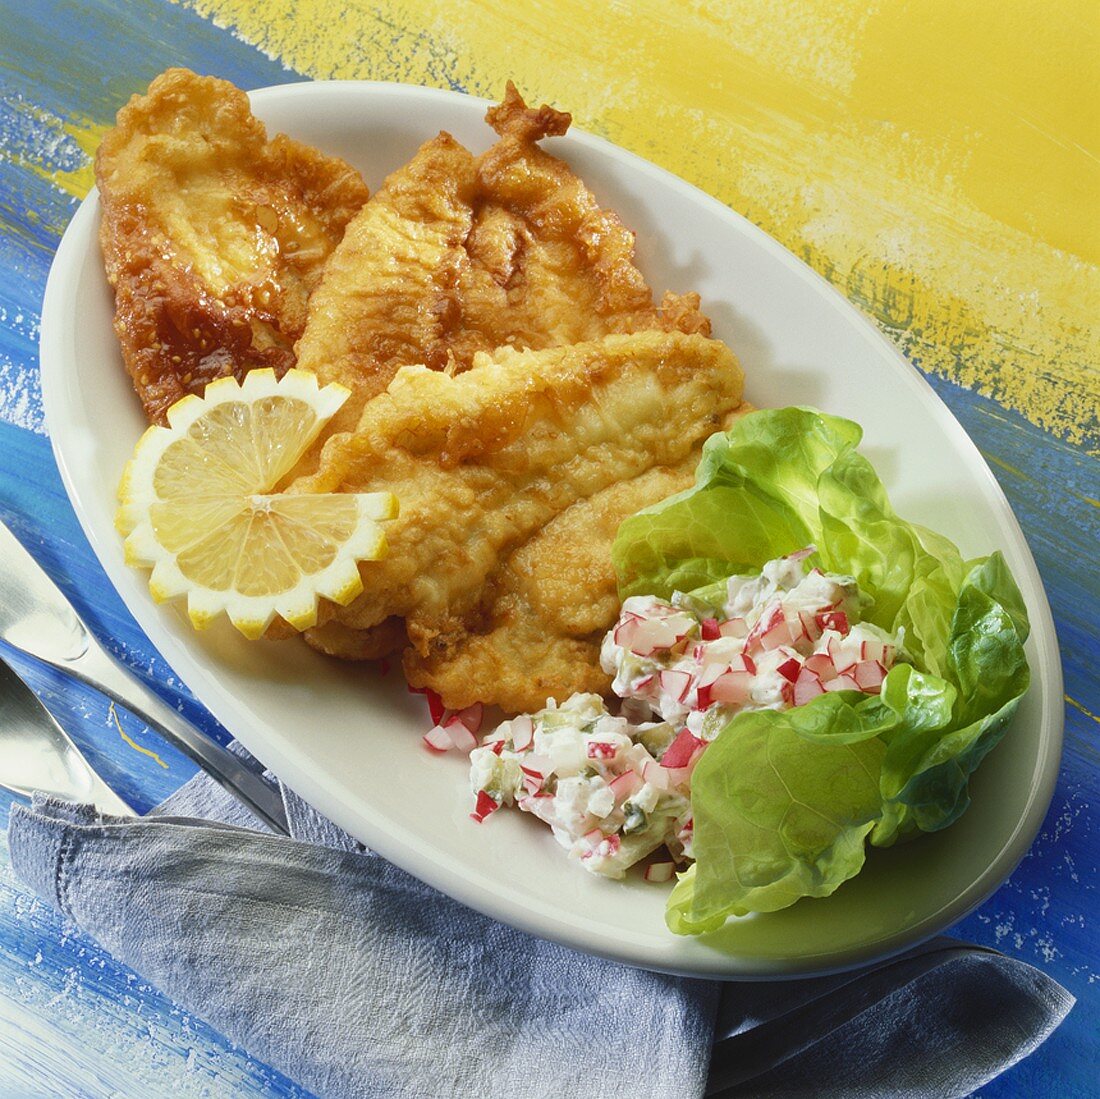 Plaice fillets in wine batter with radish salad